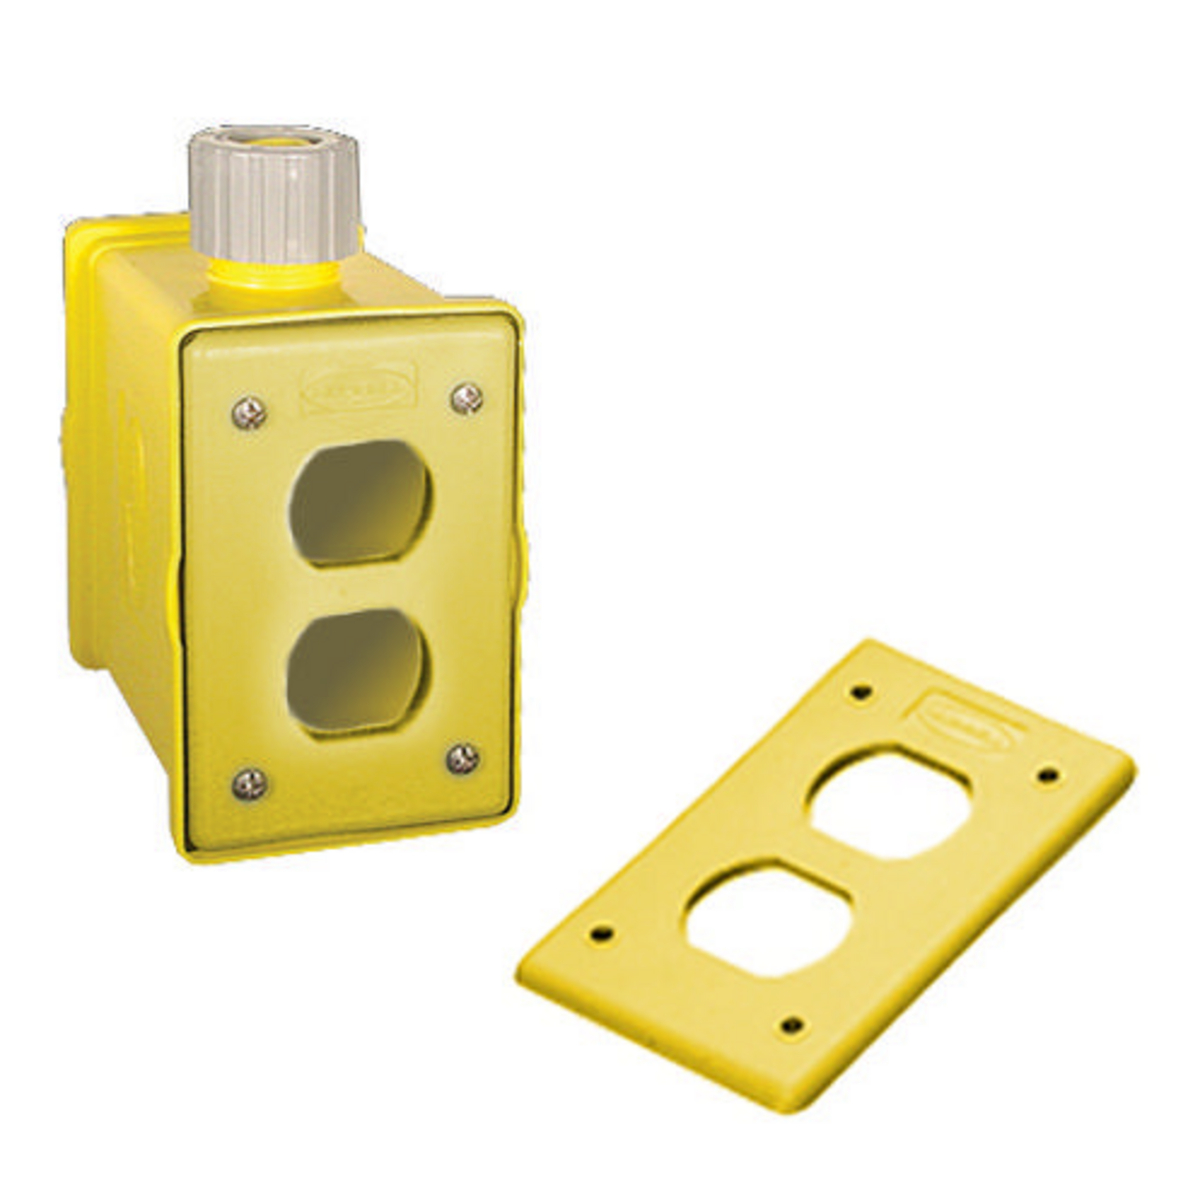 PORTABLE OUTLET BOX W/DUP, YELLOW PLATE